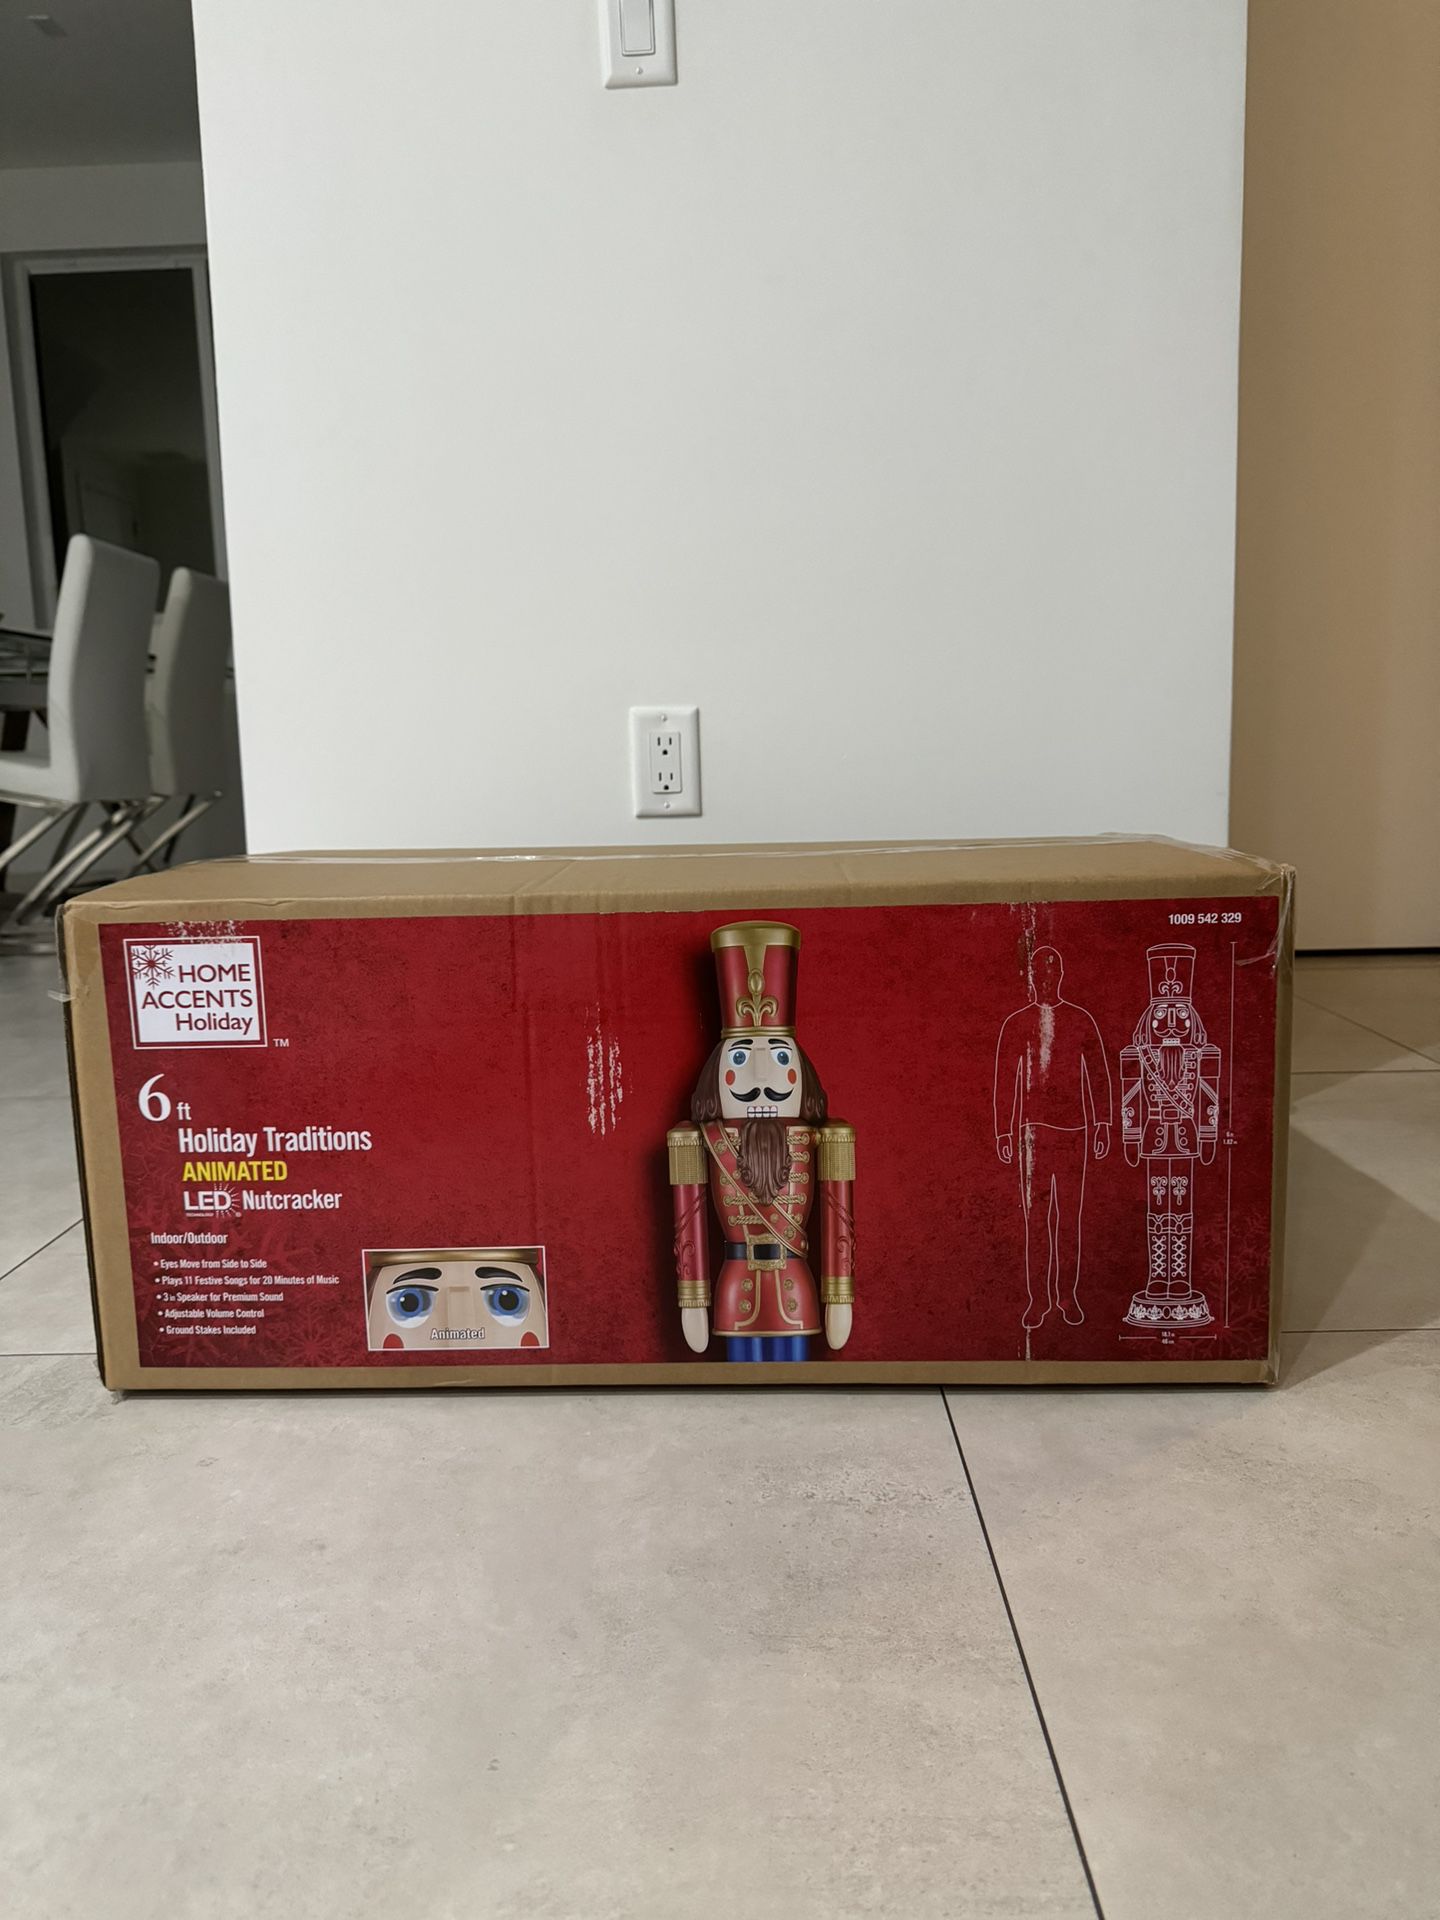 6'FT Life-Size Holiday Traditions Animated LED Nutcracker New in Original Box